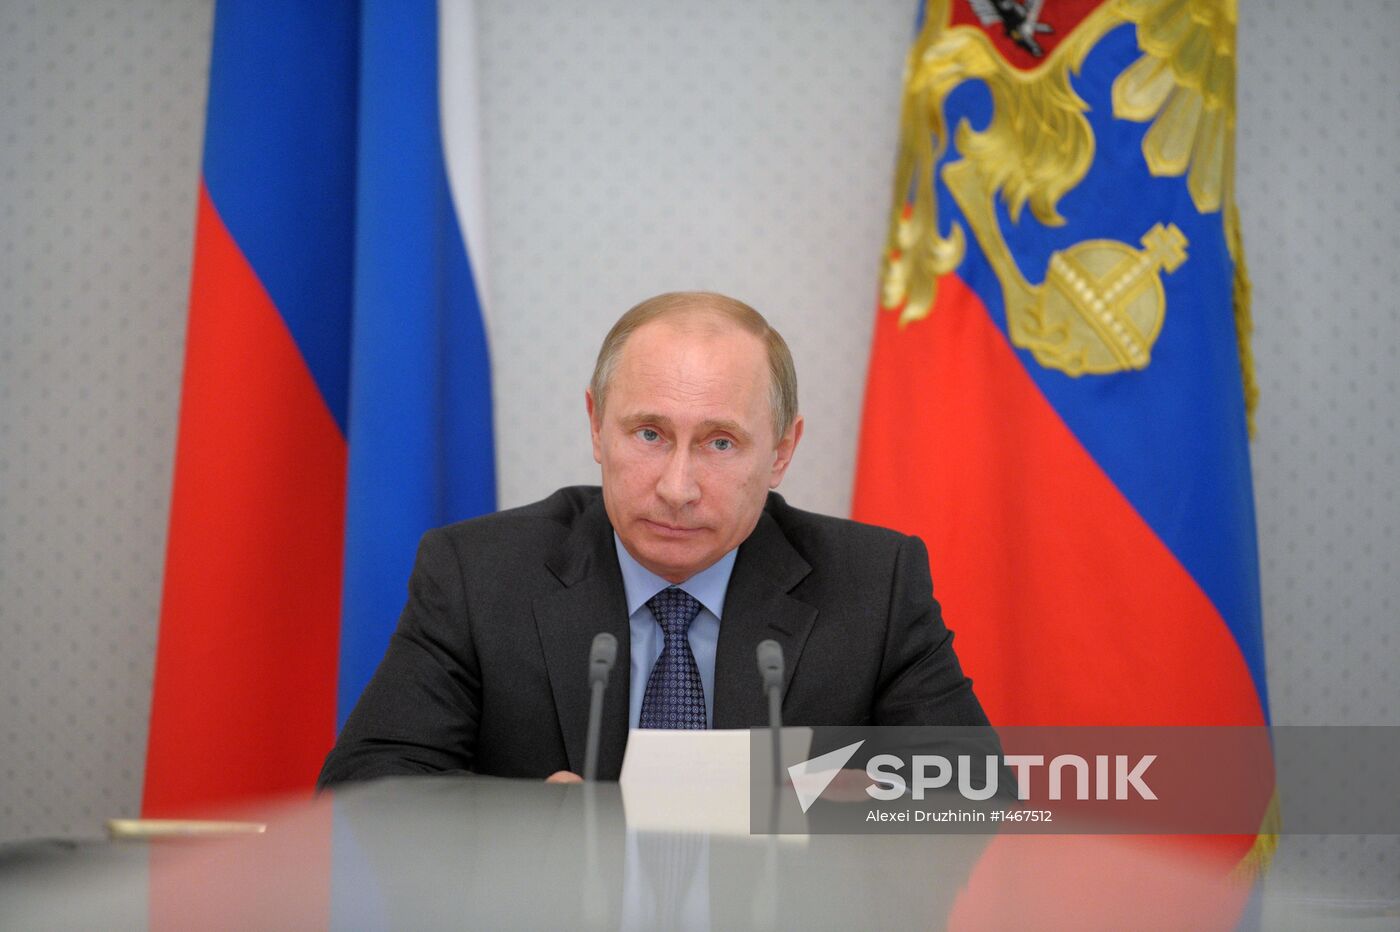 Putin meets with Defense Ministry, Security Council heads